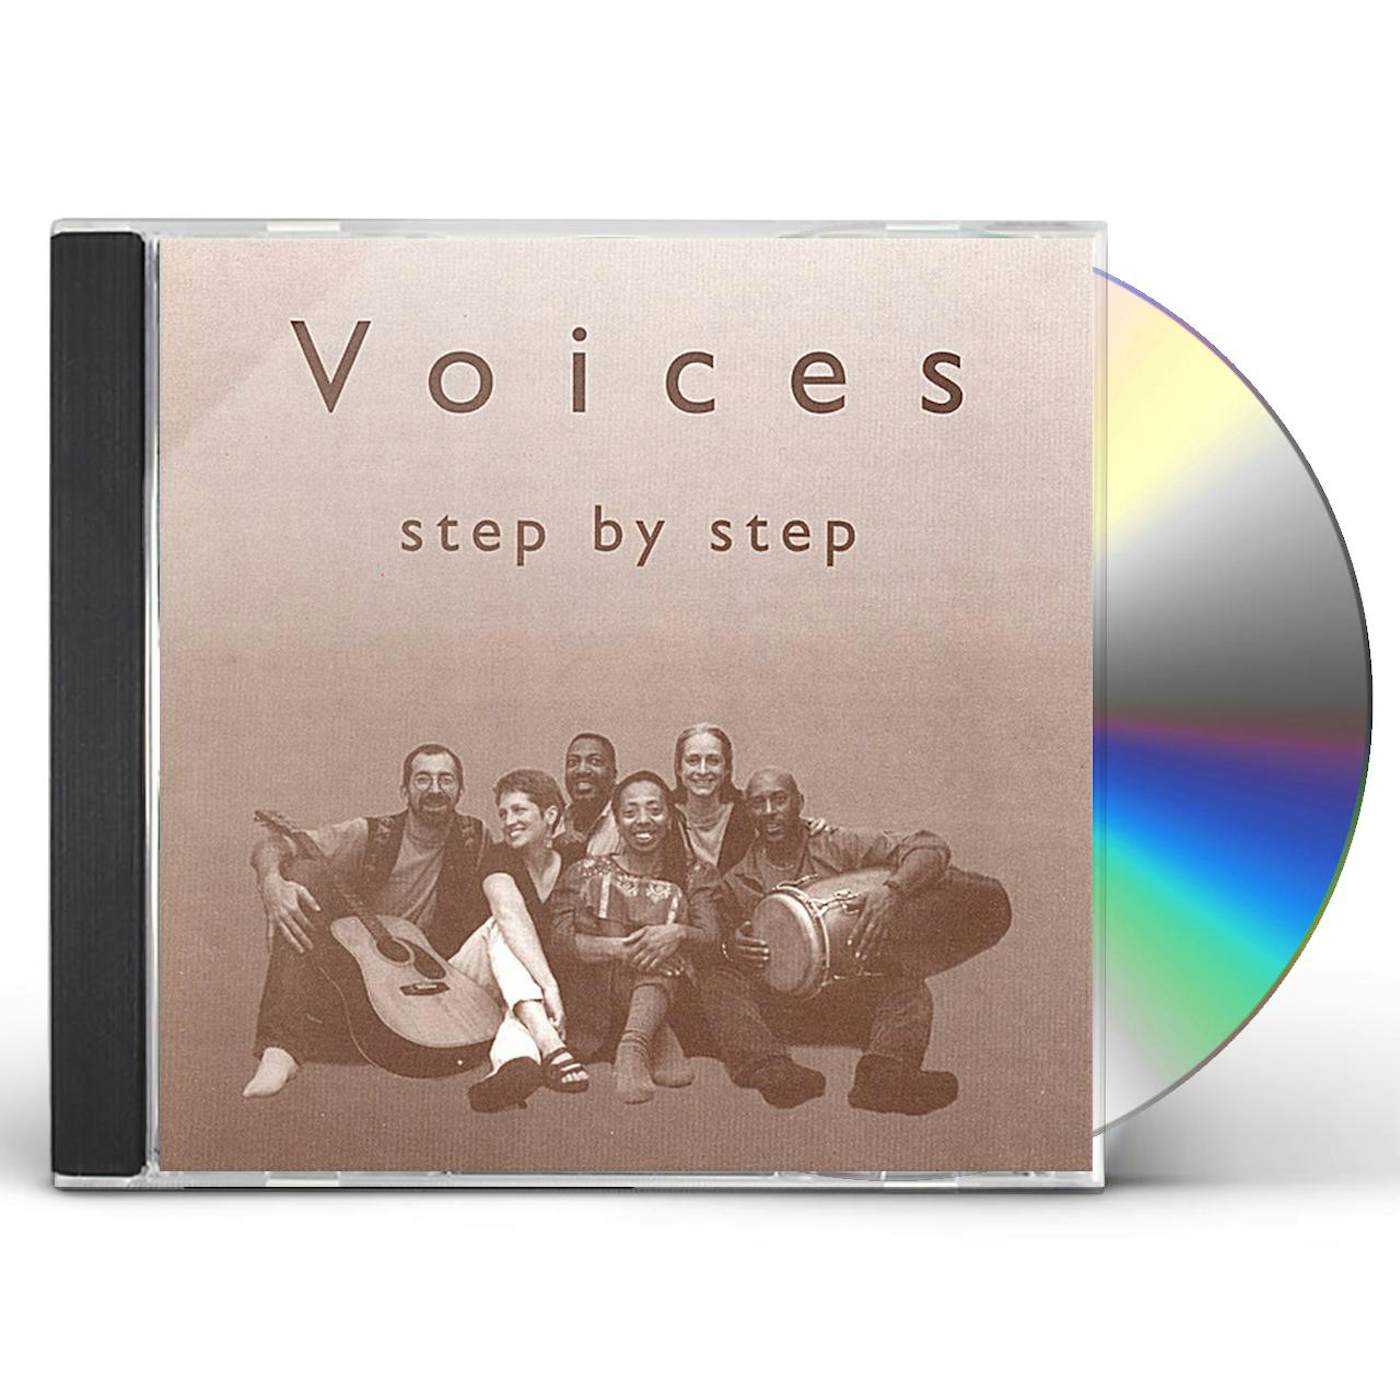 The Voices STEP BY STEP CD